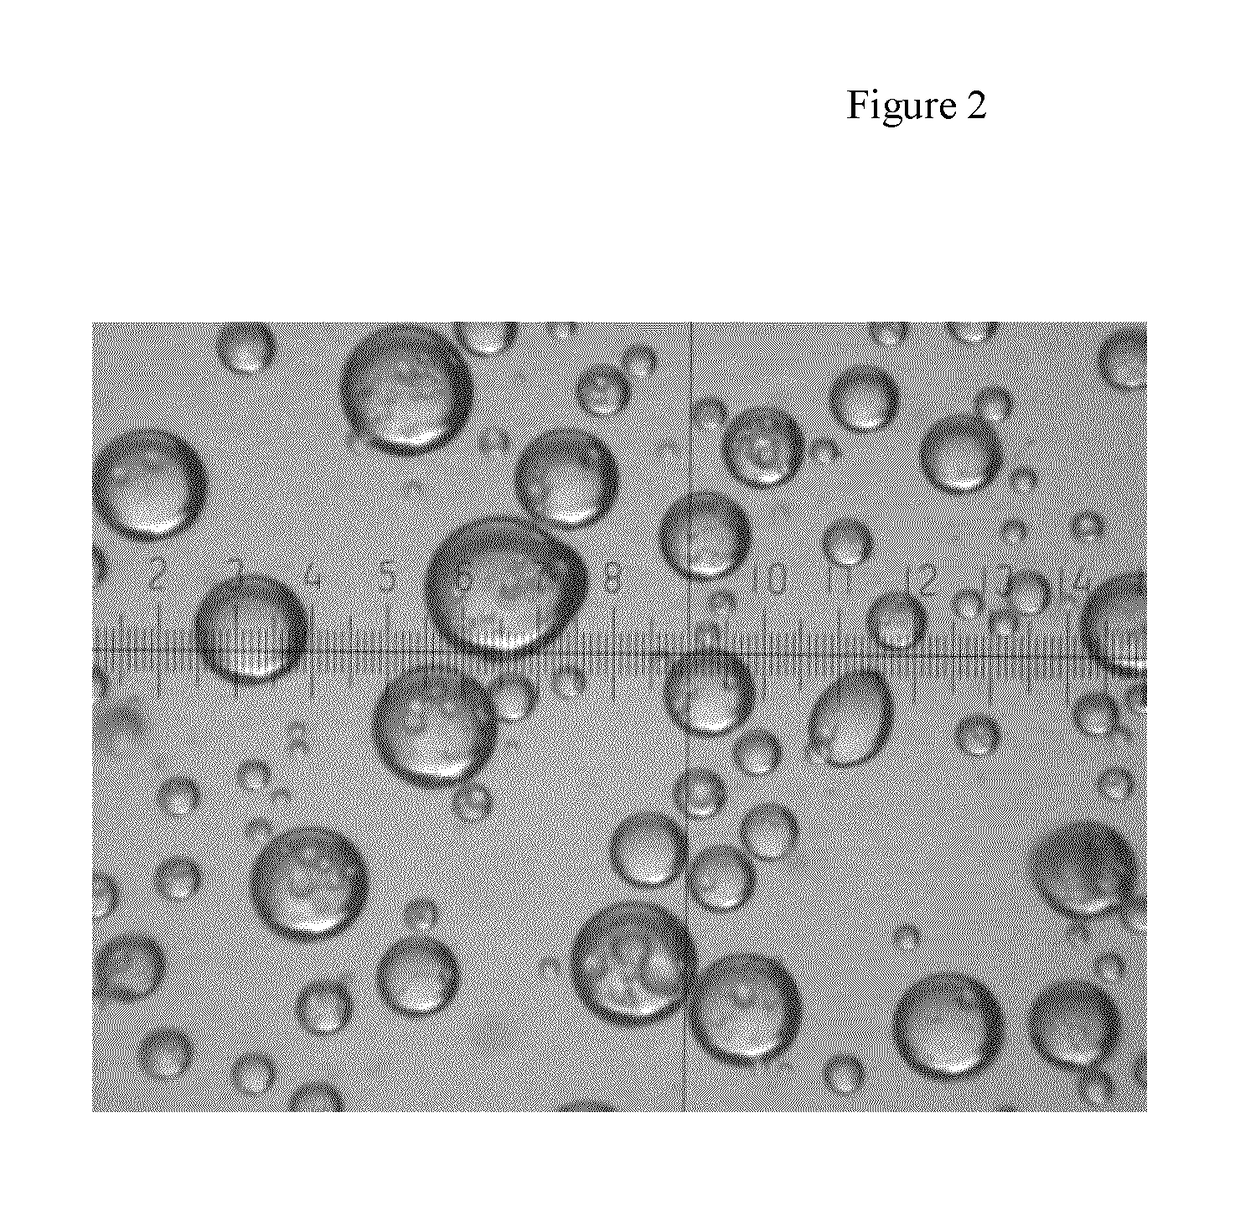 Dermal filler composed of macroporous chitosan microbeads and cross-linked hyaluronic acid